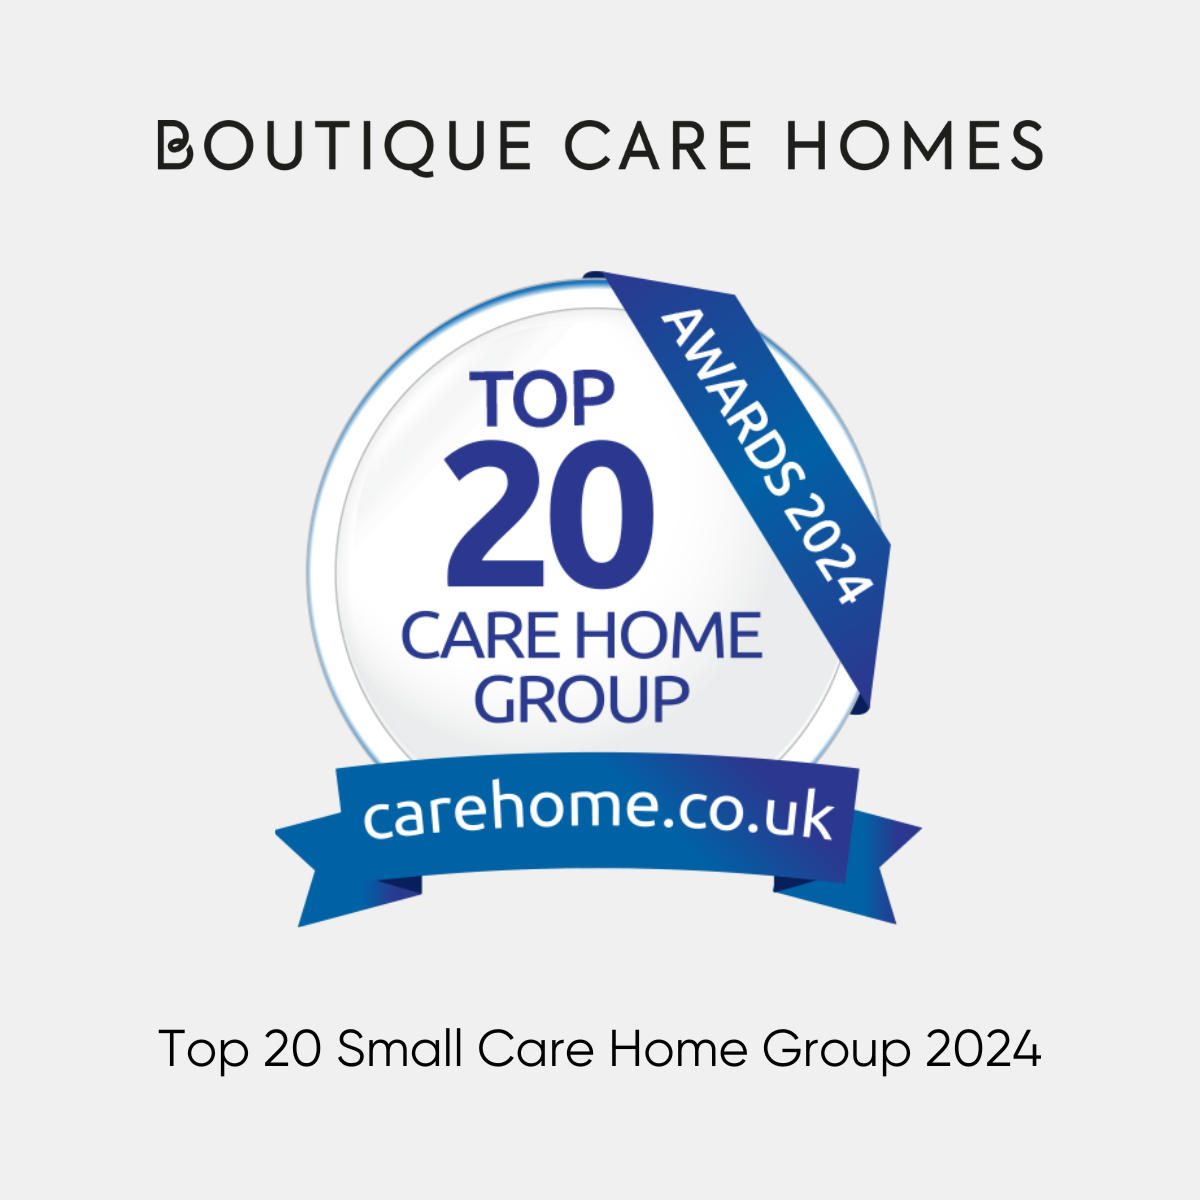 Boutique Care Home Top 20 Small Care Home Group 2024